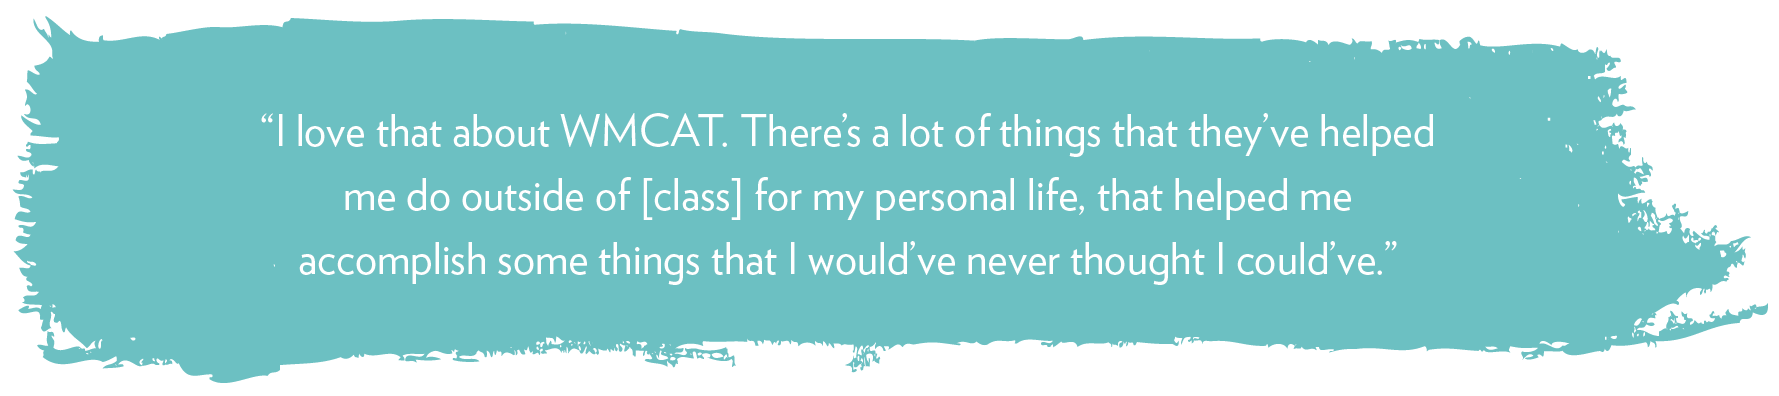 “I love that about WMCAT. There’s a lot of things that they’ve helped me do outside of [class] for my personal life, that helped me accomplish some things that I would’ve never thought I could’ve.”